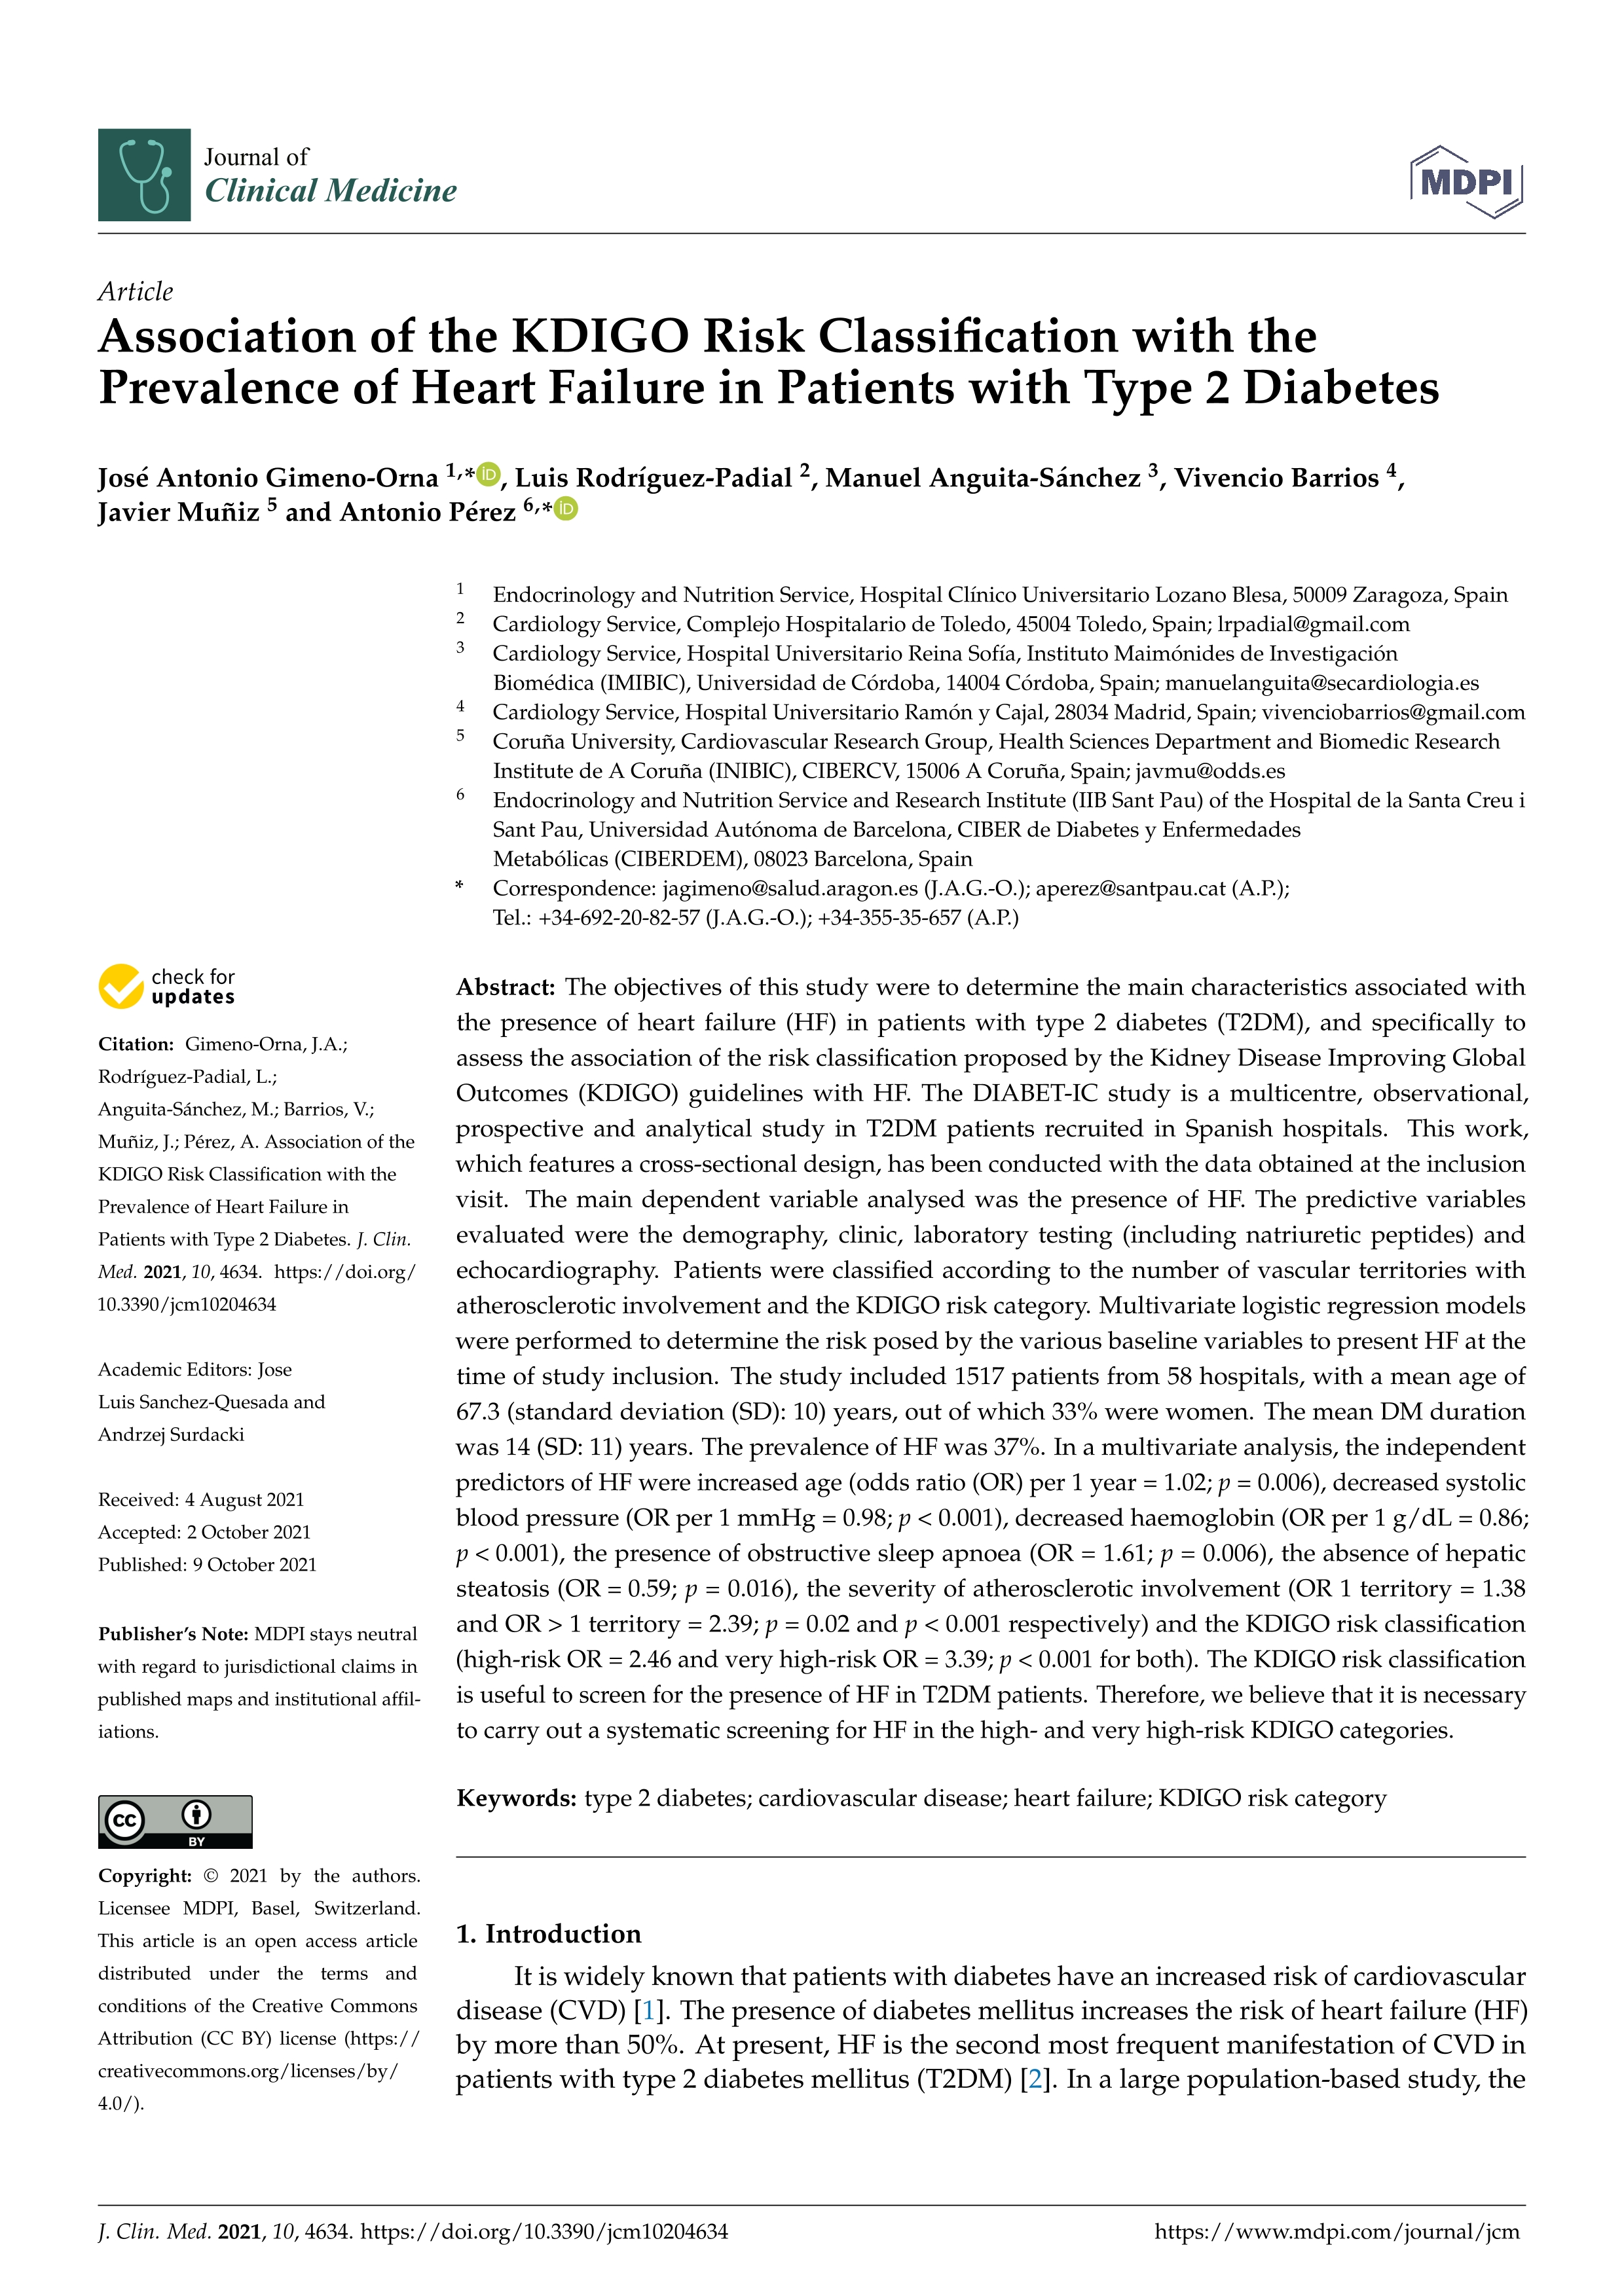 Association of the kdigo risk classification with the prevalence of heart failure in patients with type 2 diabetes